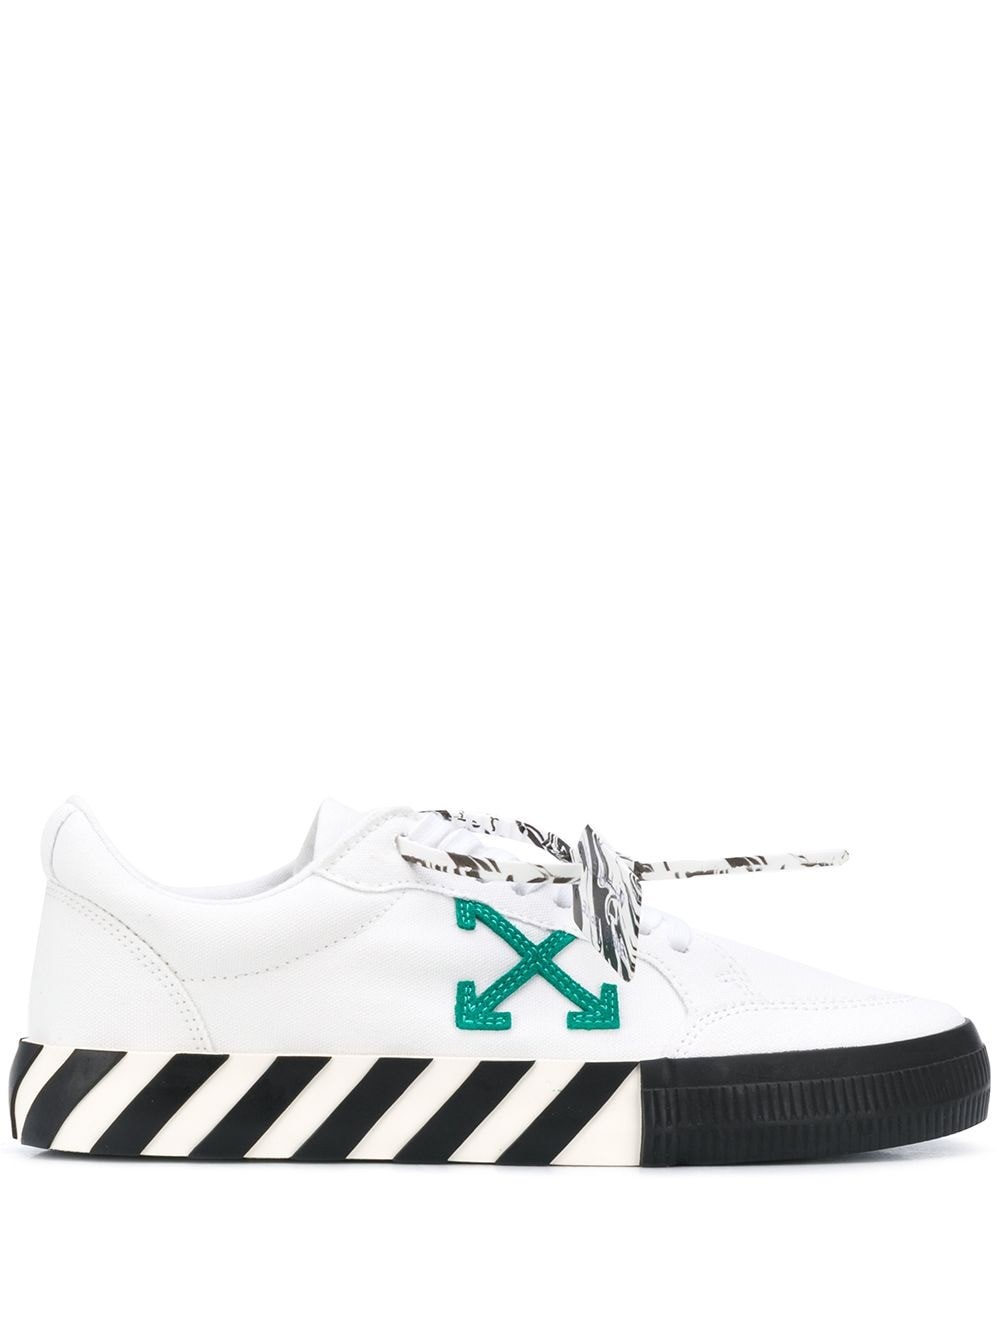 off-white LOW TOP SNEAKERS available on montiboutique.com - 34889